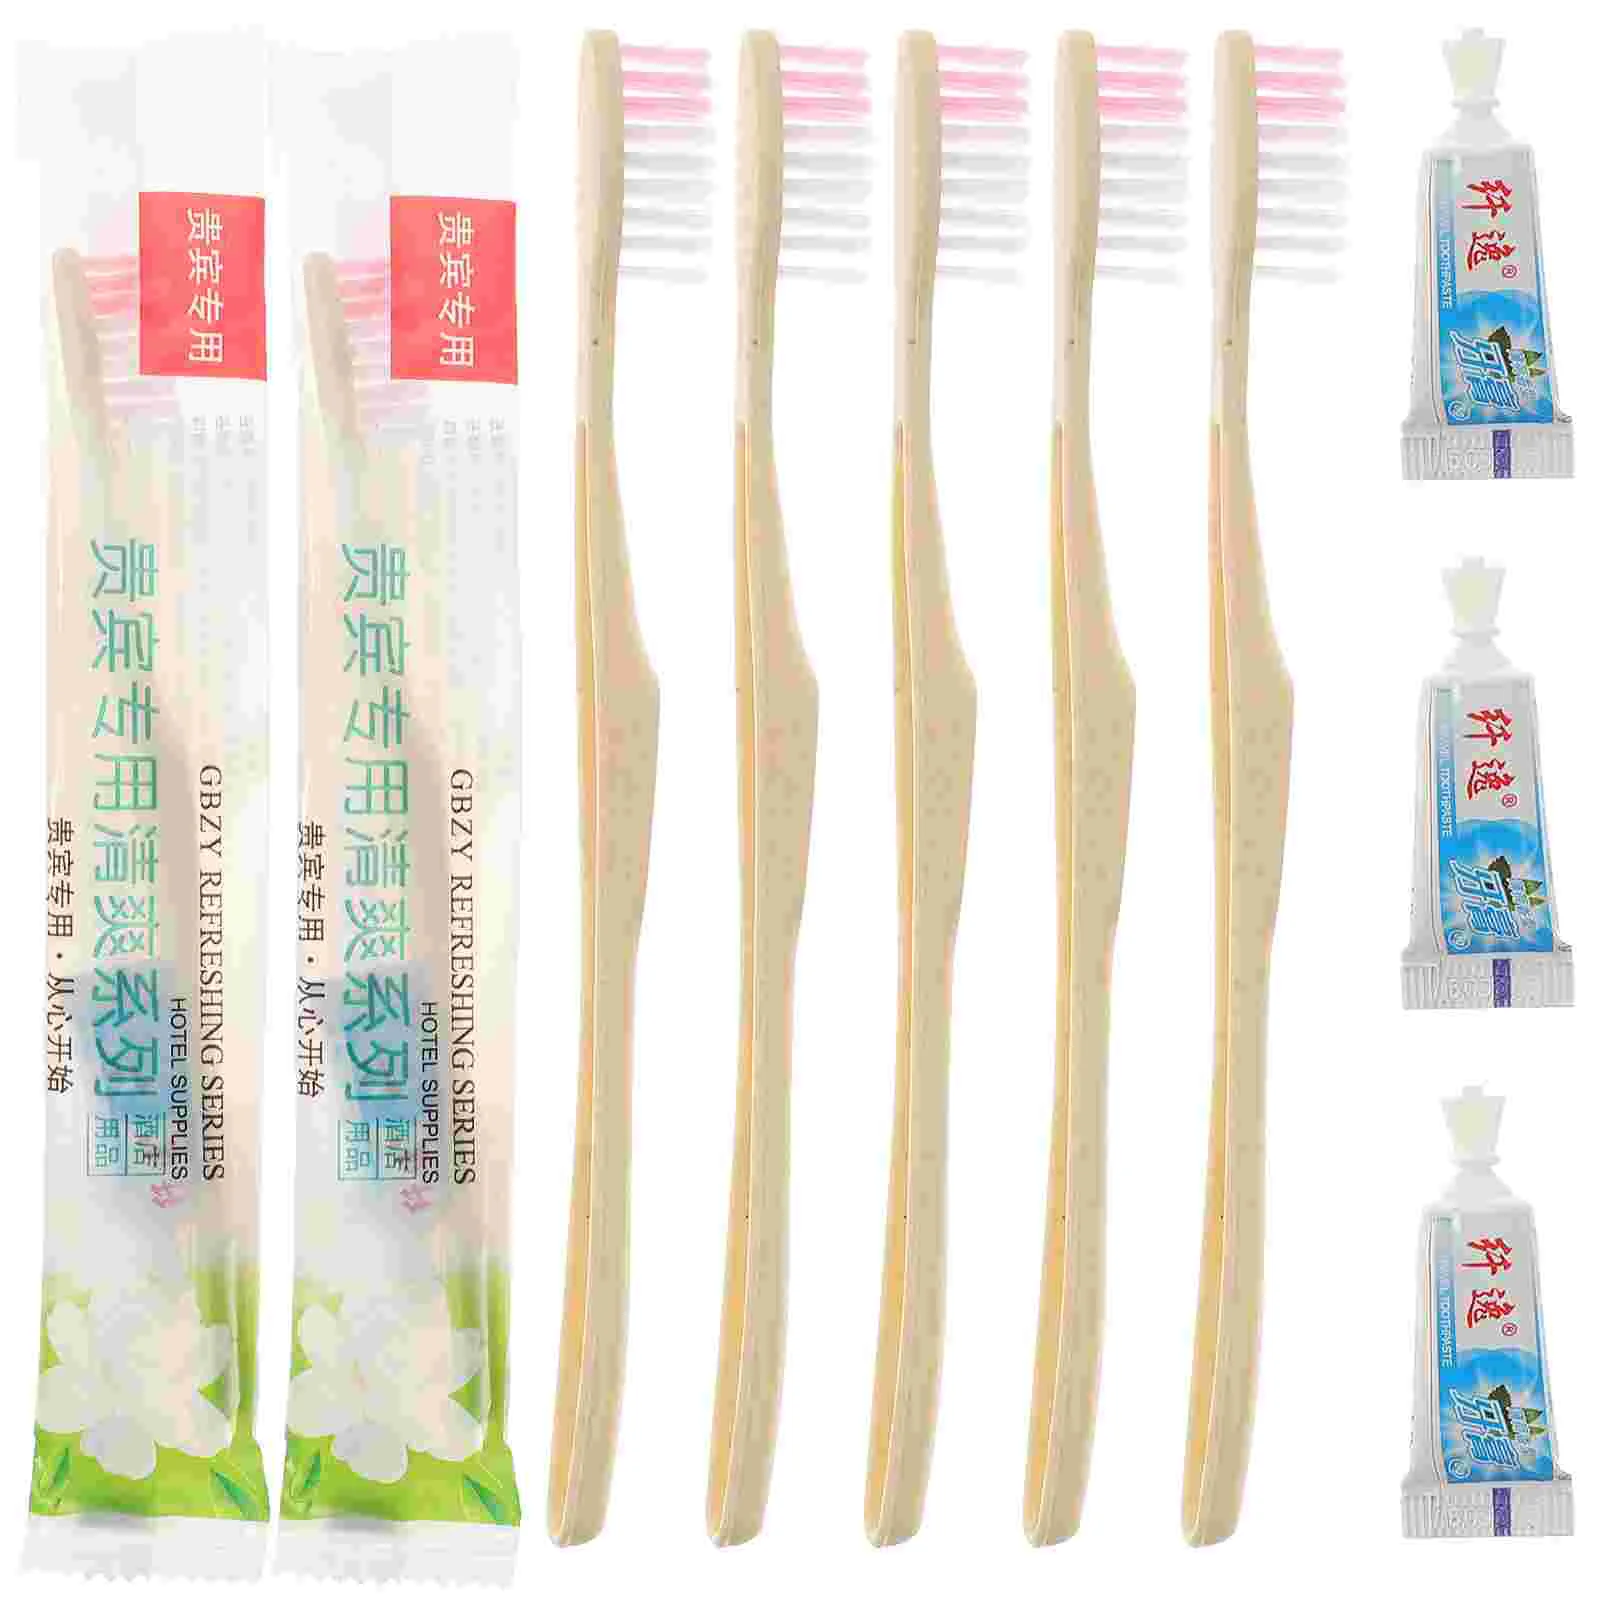 

10 Pcs Toothpaste Travel Brush Pre Pasted Individually Wrapped Disposable Dental Bamboo products